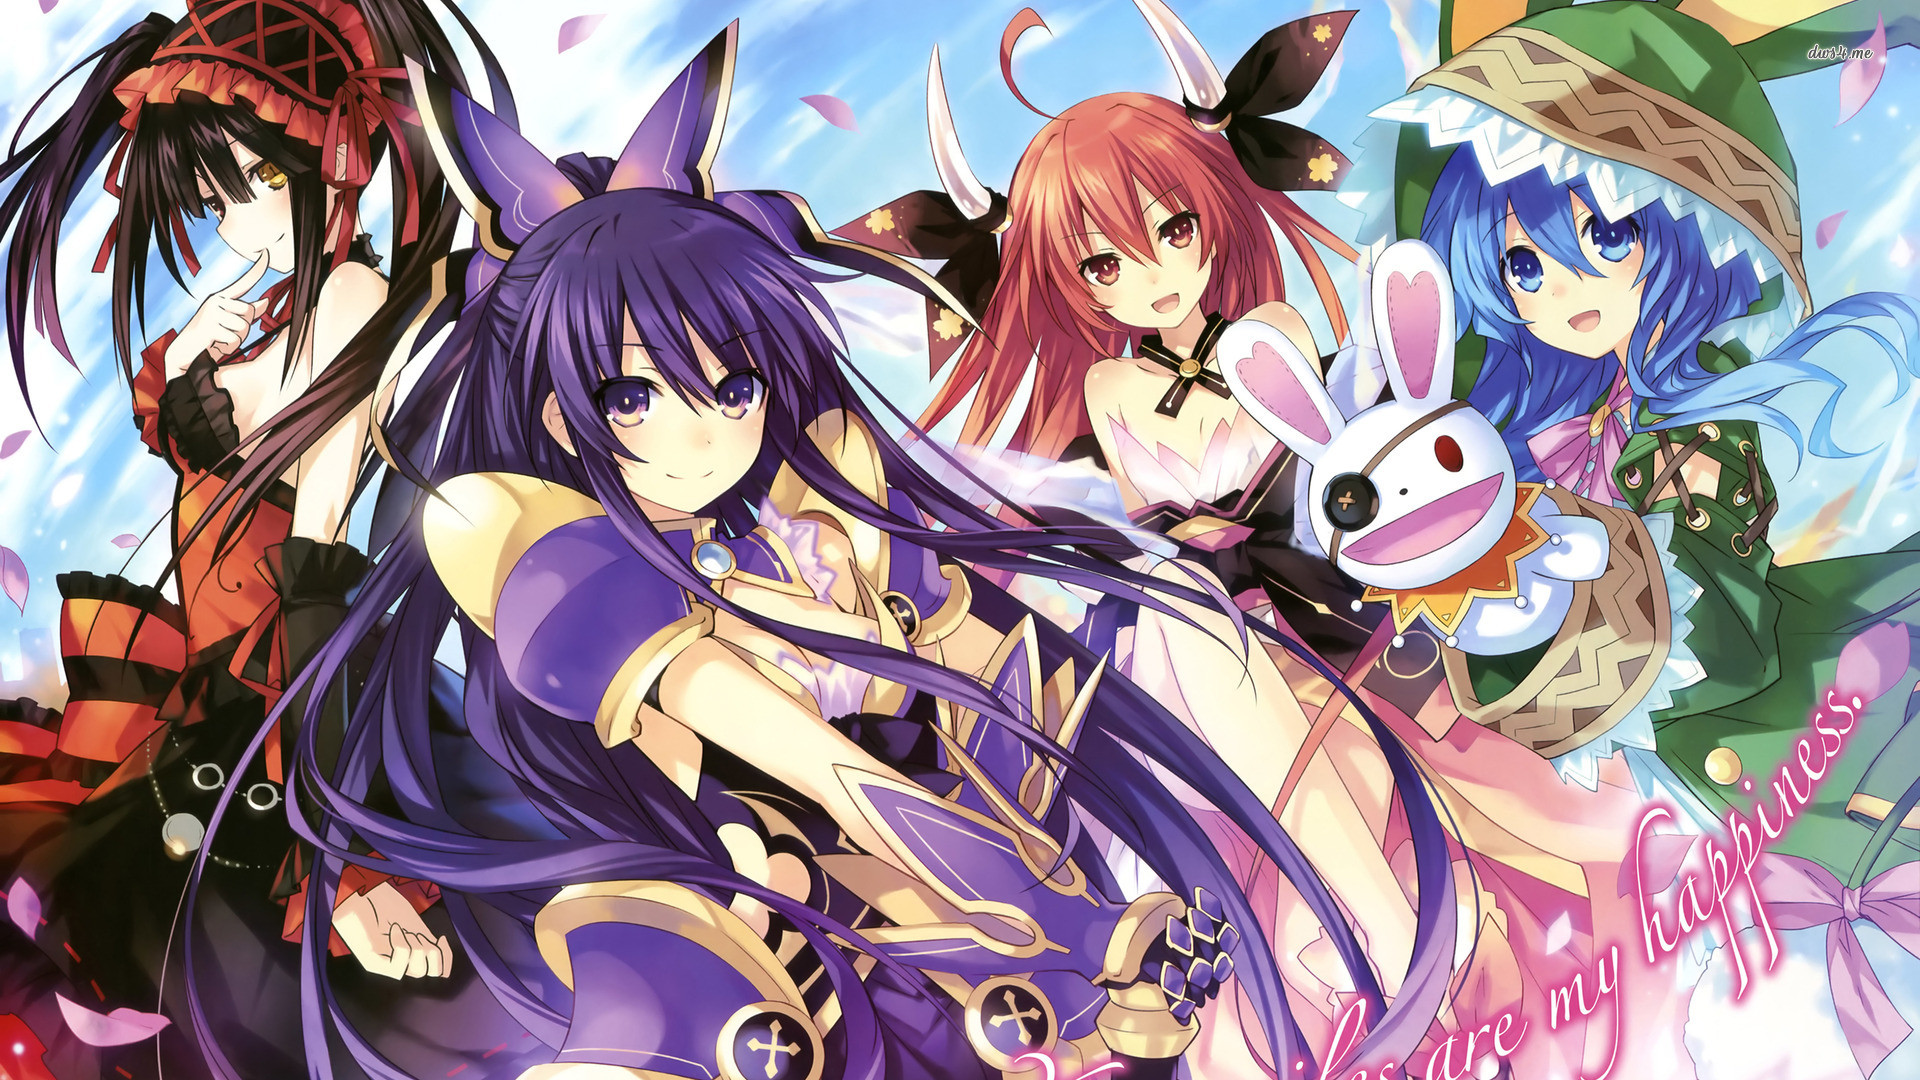 1920x1080 Date a Live wallpaper - Anime wallpapers - #18563